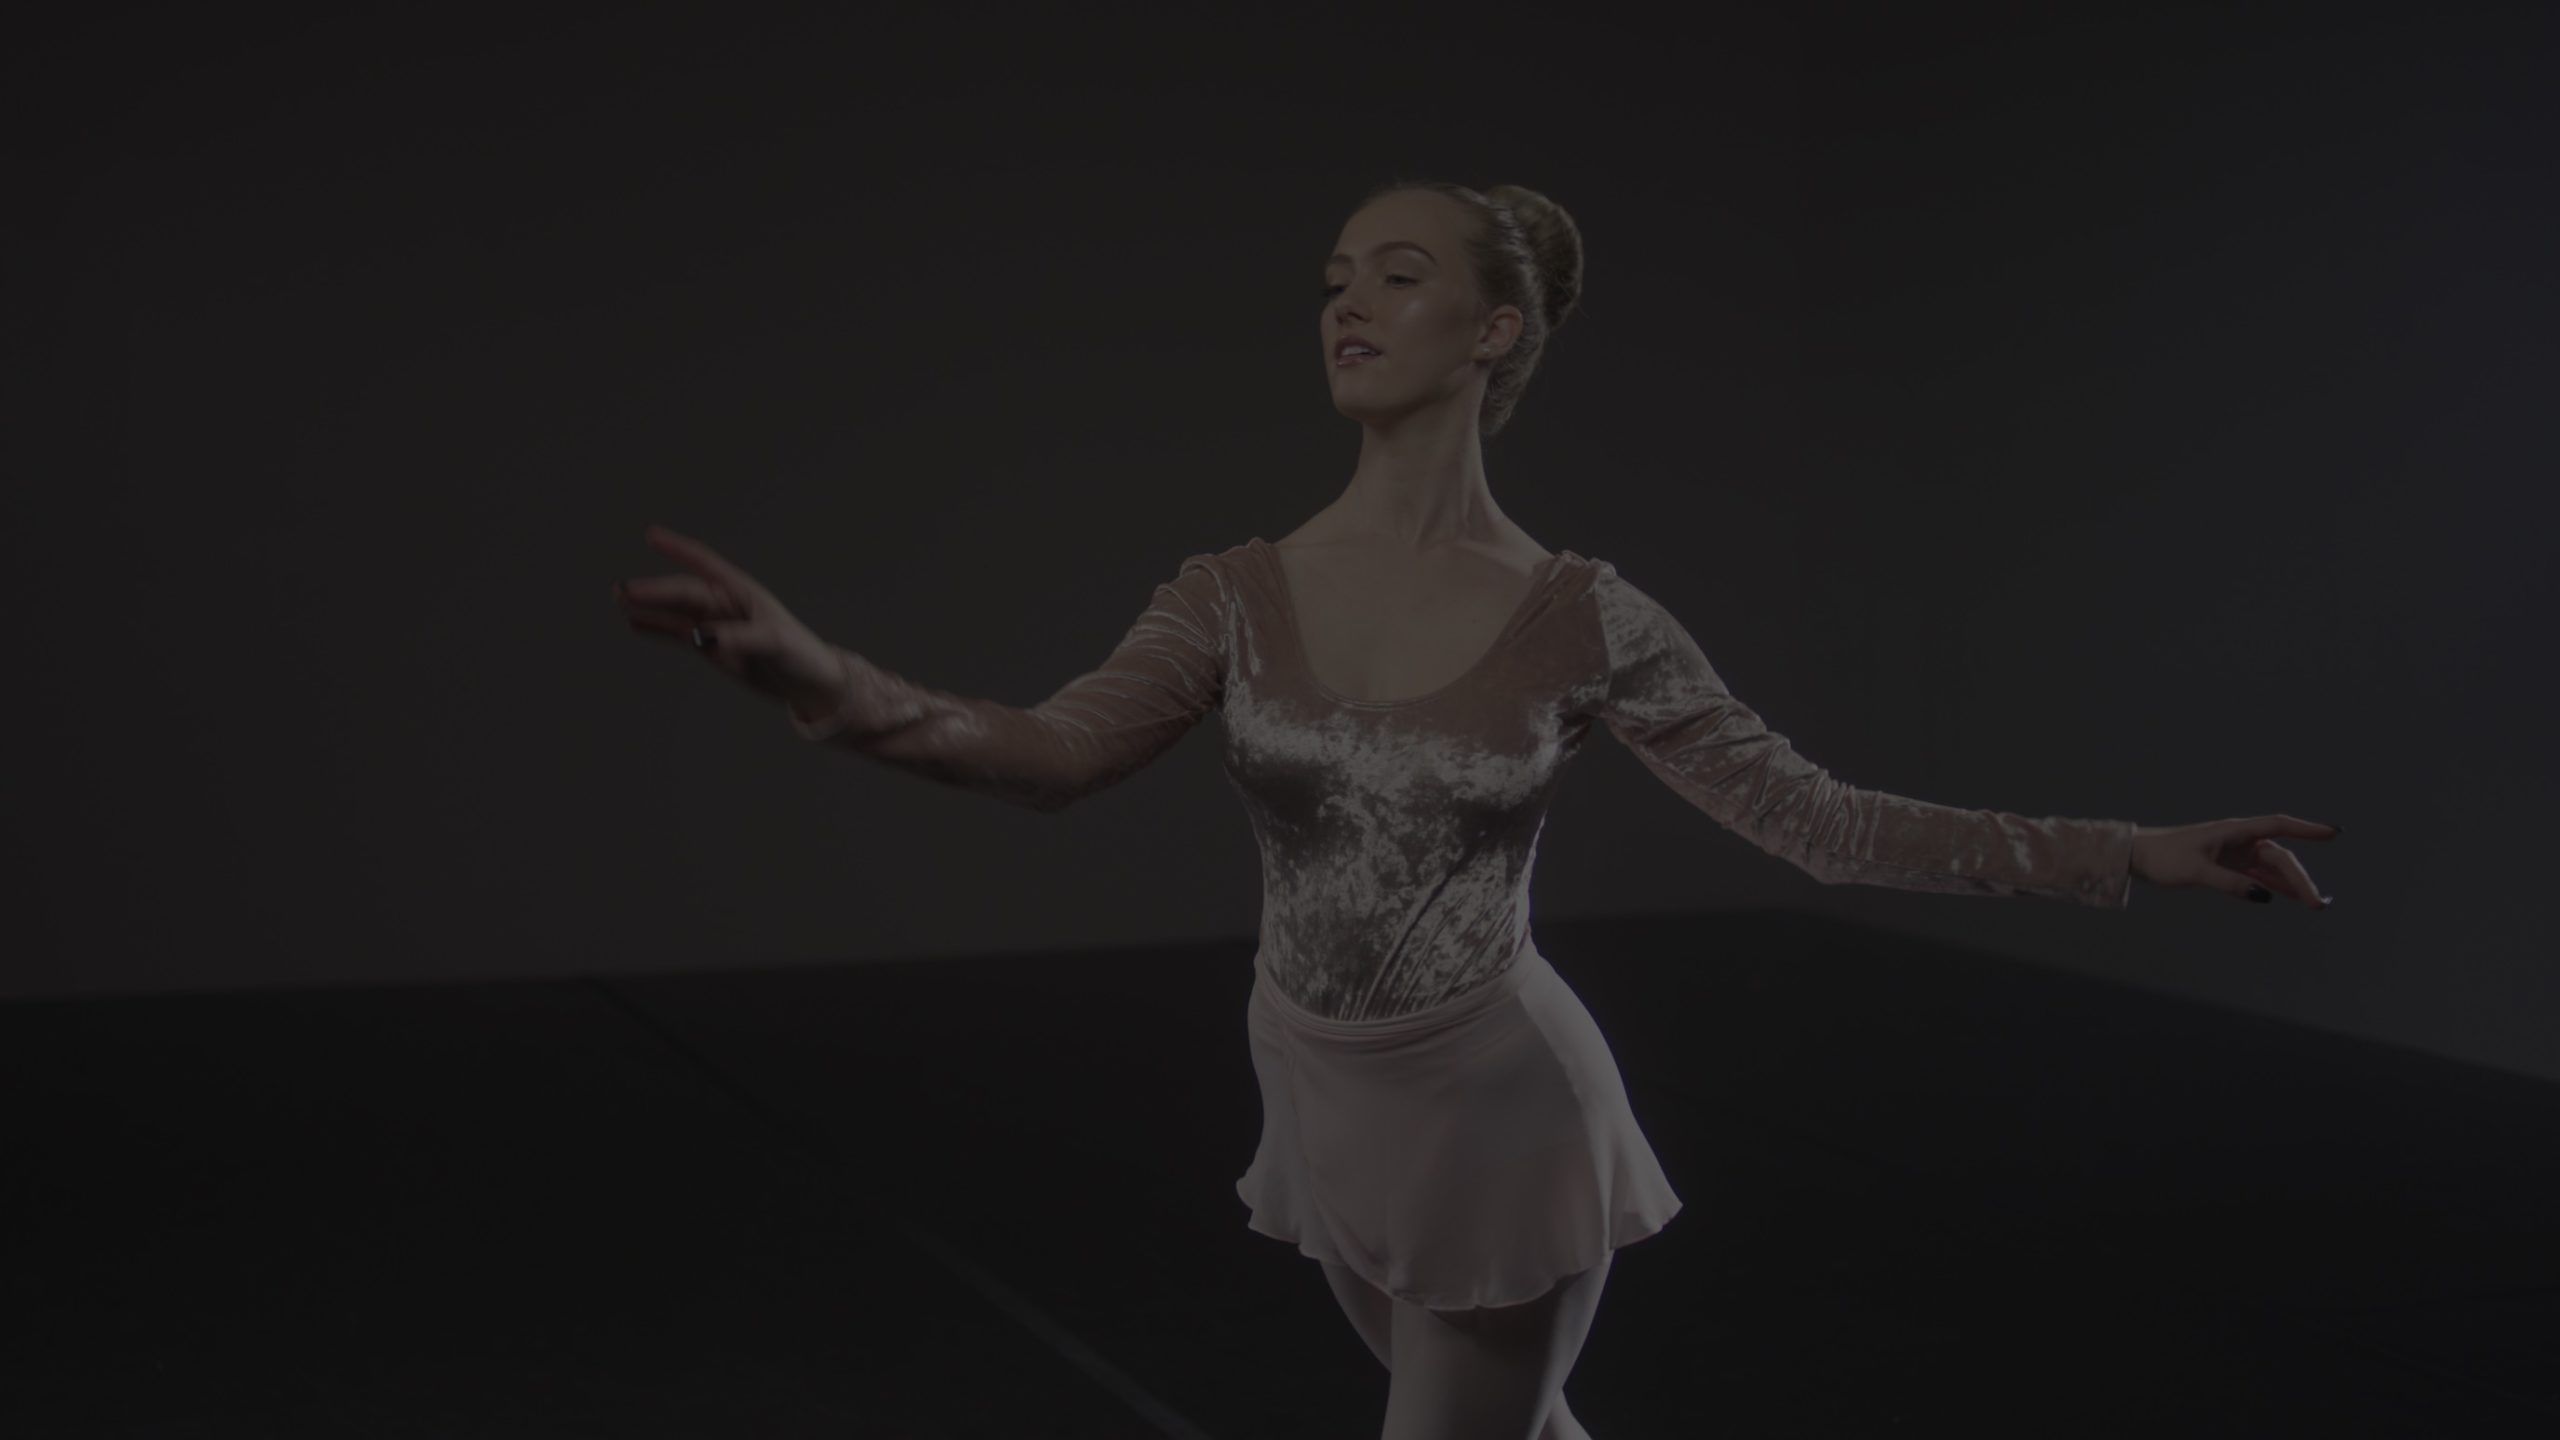 Video Production with Pretty Vulgar Dimmed image of a female dancer with short blond hair in a bun, long sleeved shirt and short dress skirt.